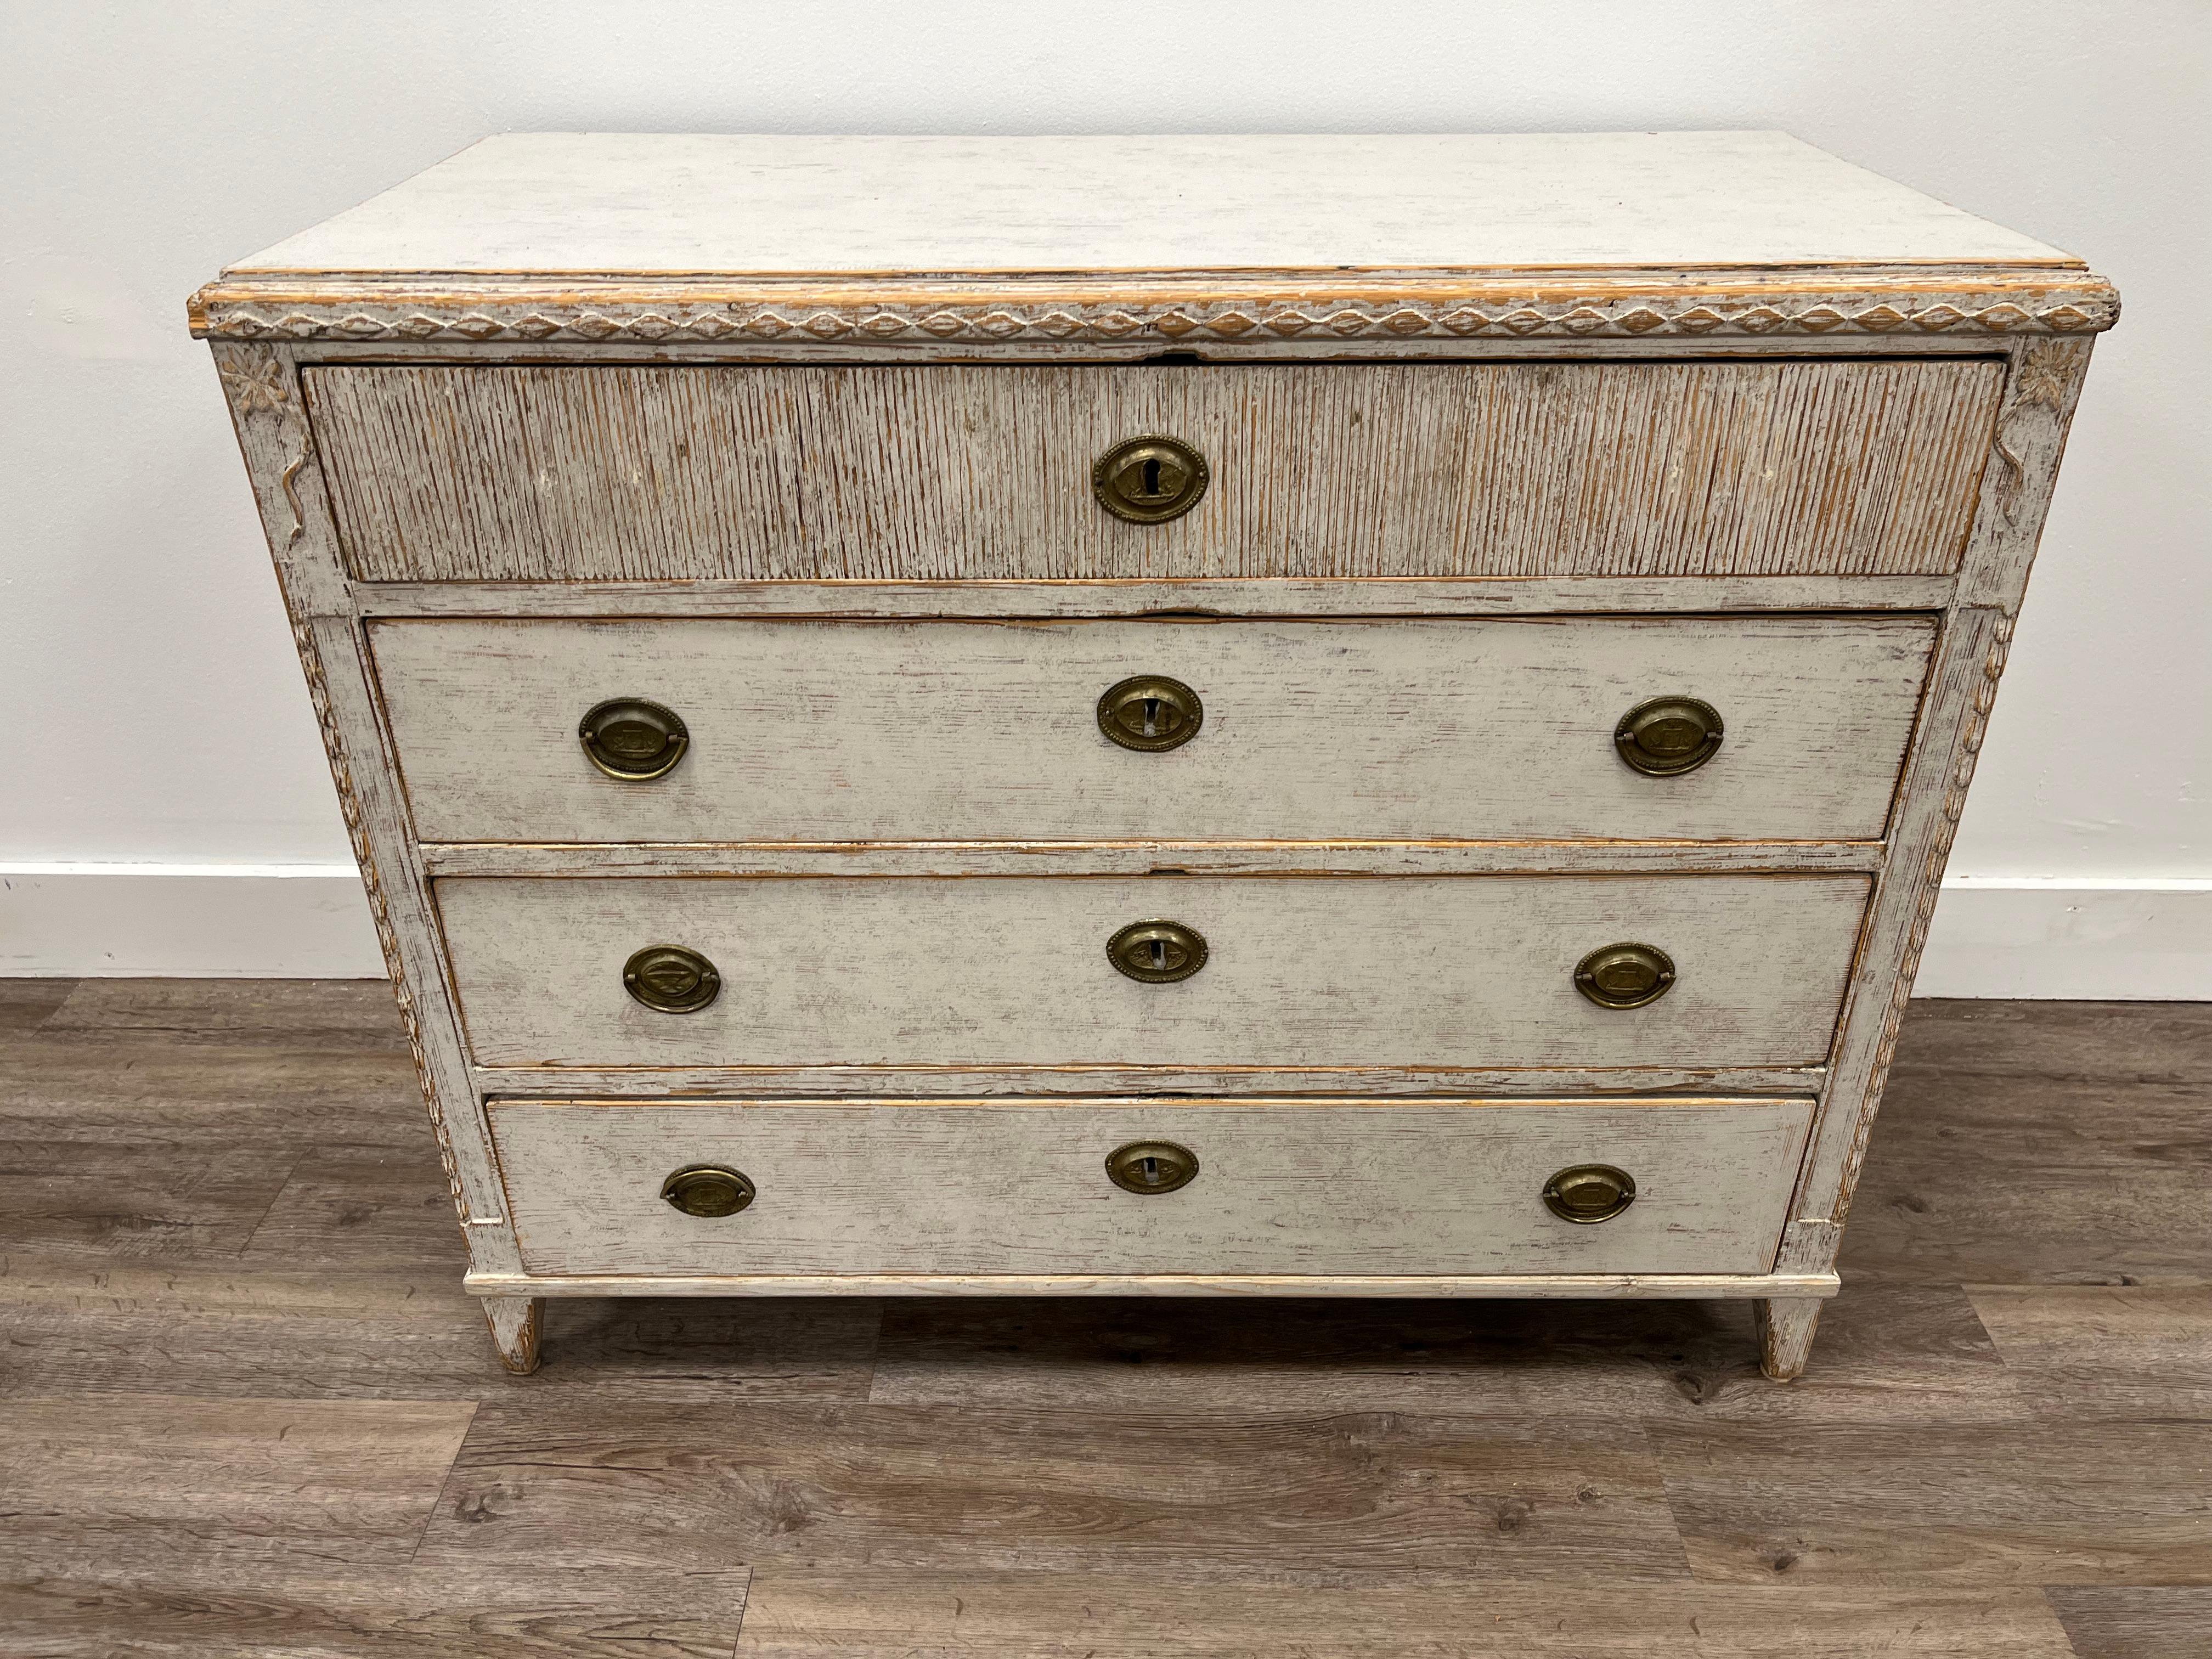 A provincial Late Gustavian chest of drawers with unusual wood carvings - diamond detailing across the top and sides, a heavily vertical reeded top drawer front, floral medallions in the upper corners and vertical front frames that are both recessed